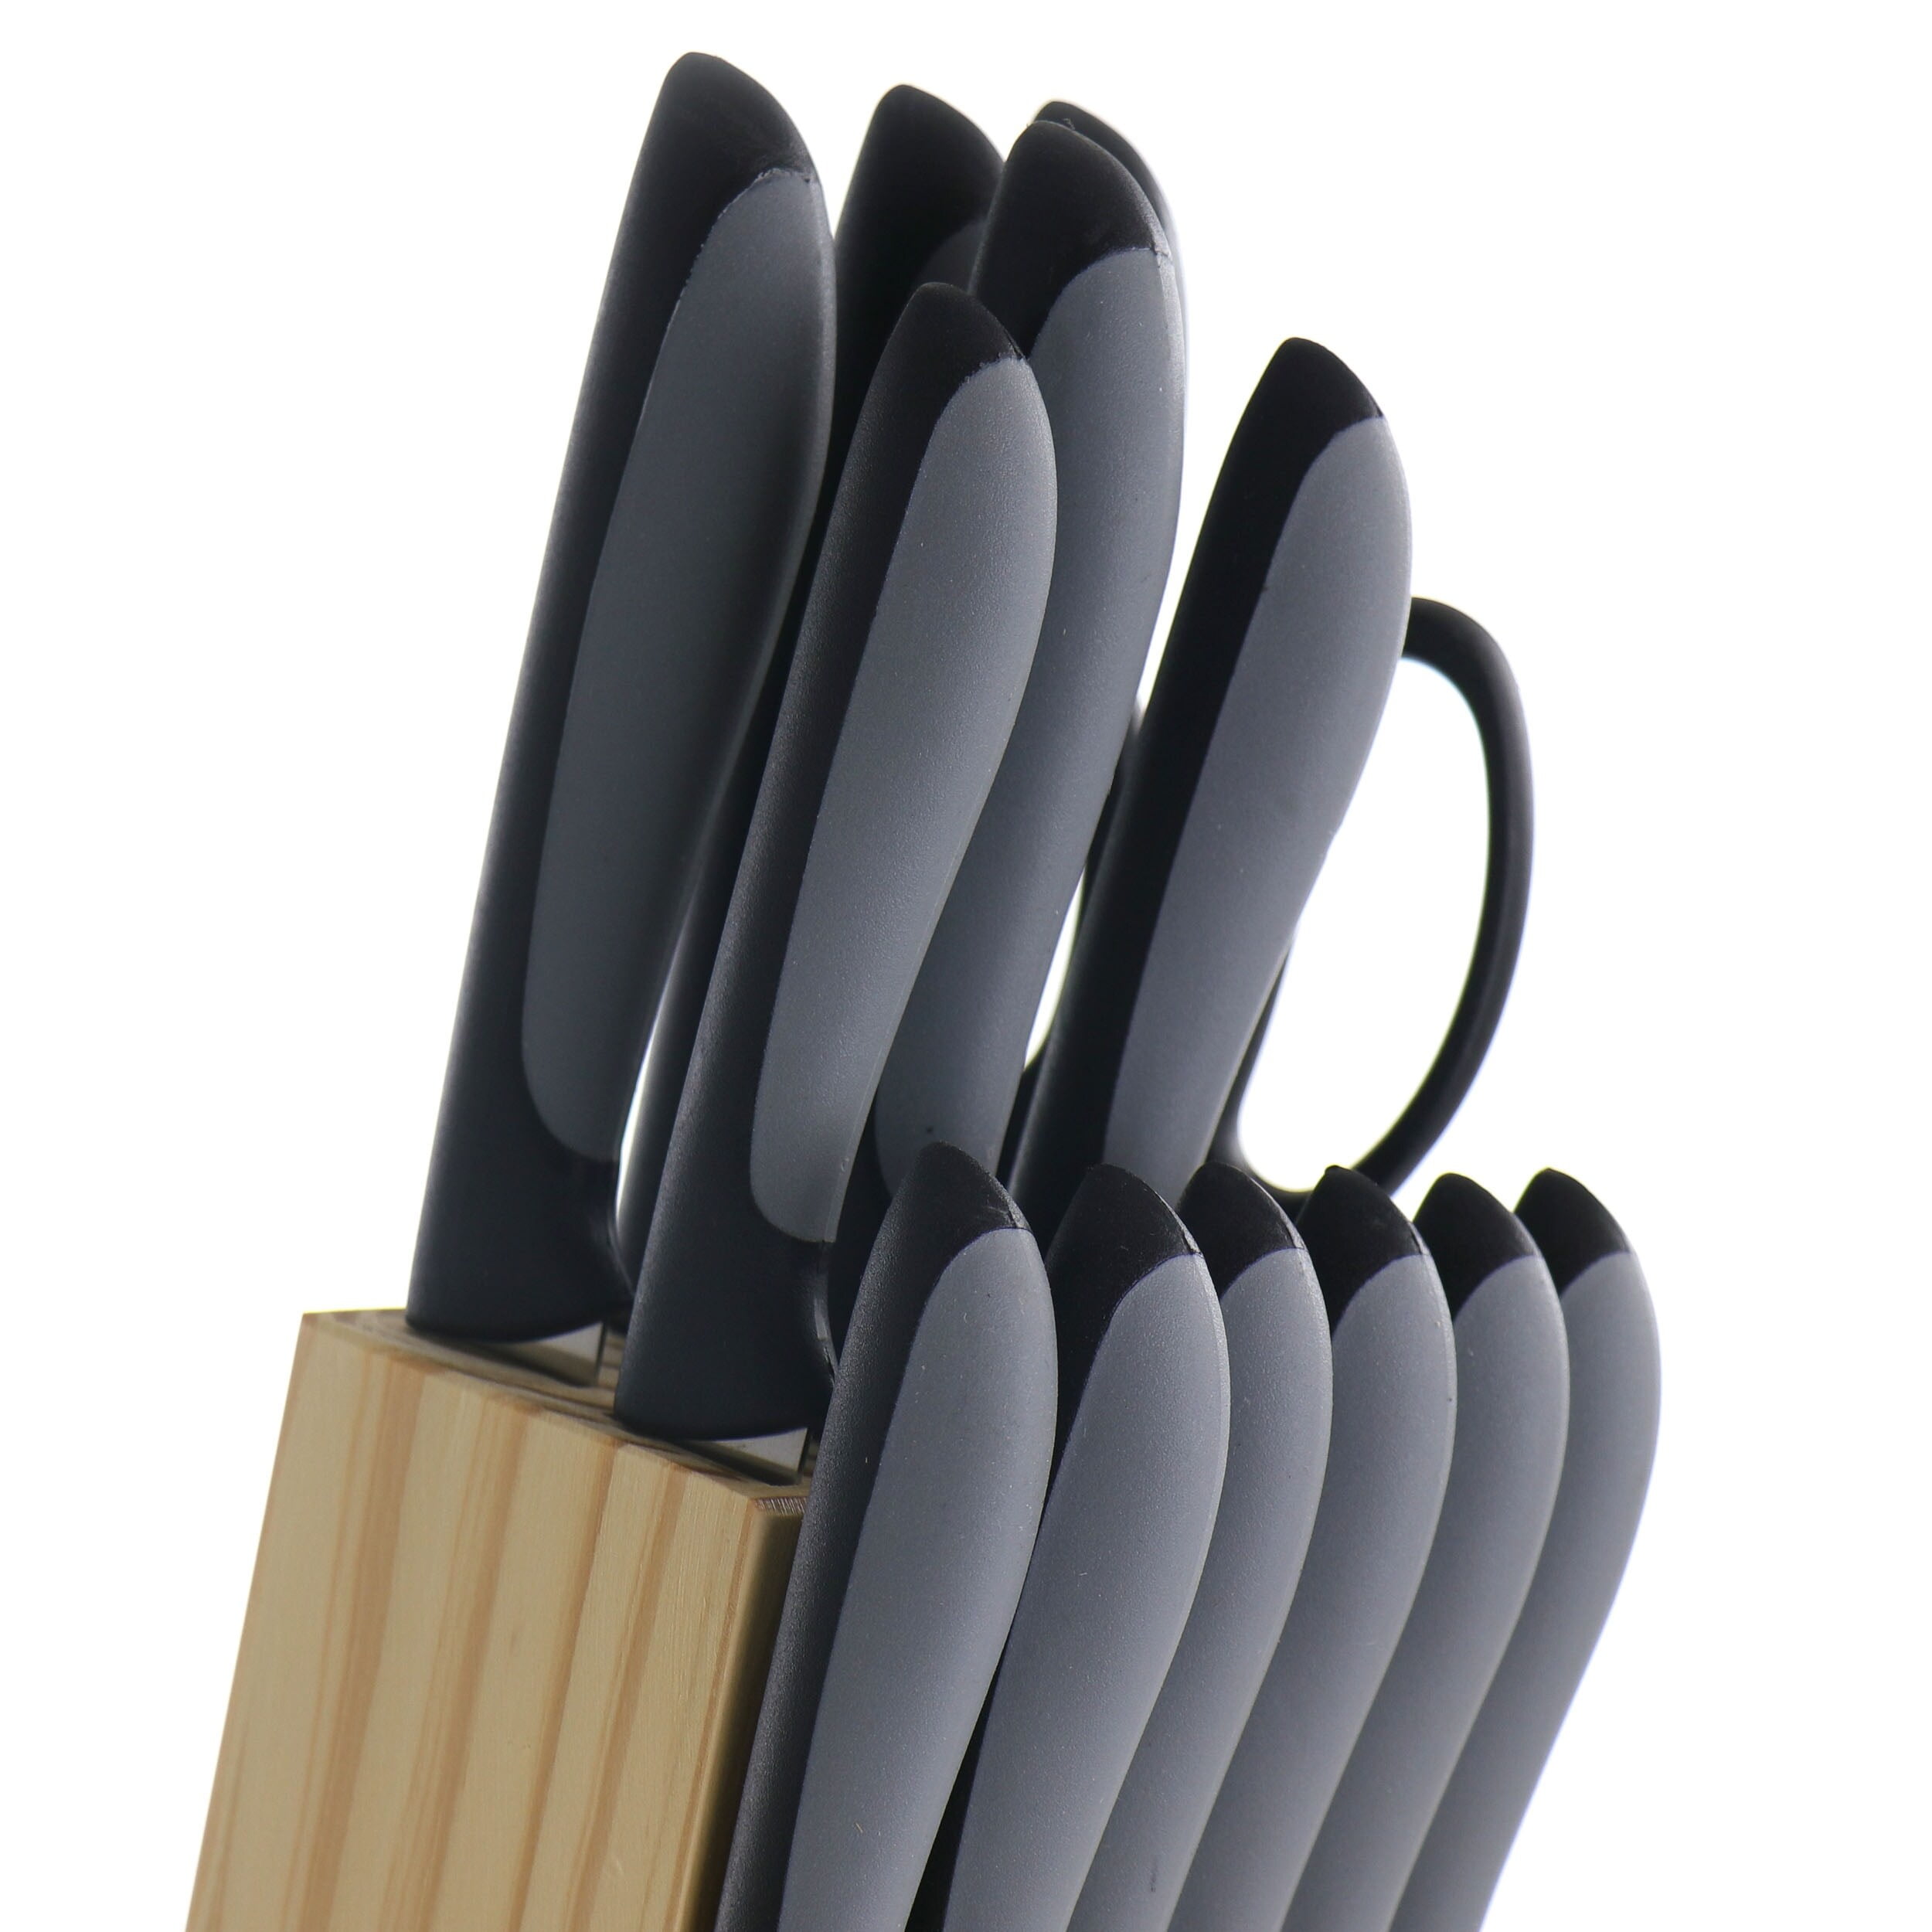 Chef Tested 14-Piece Cutlery Set by Wards